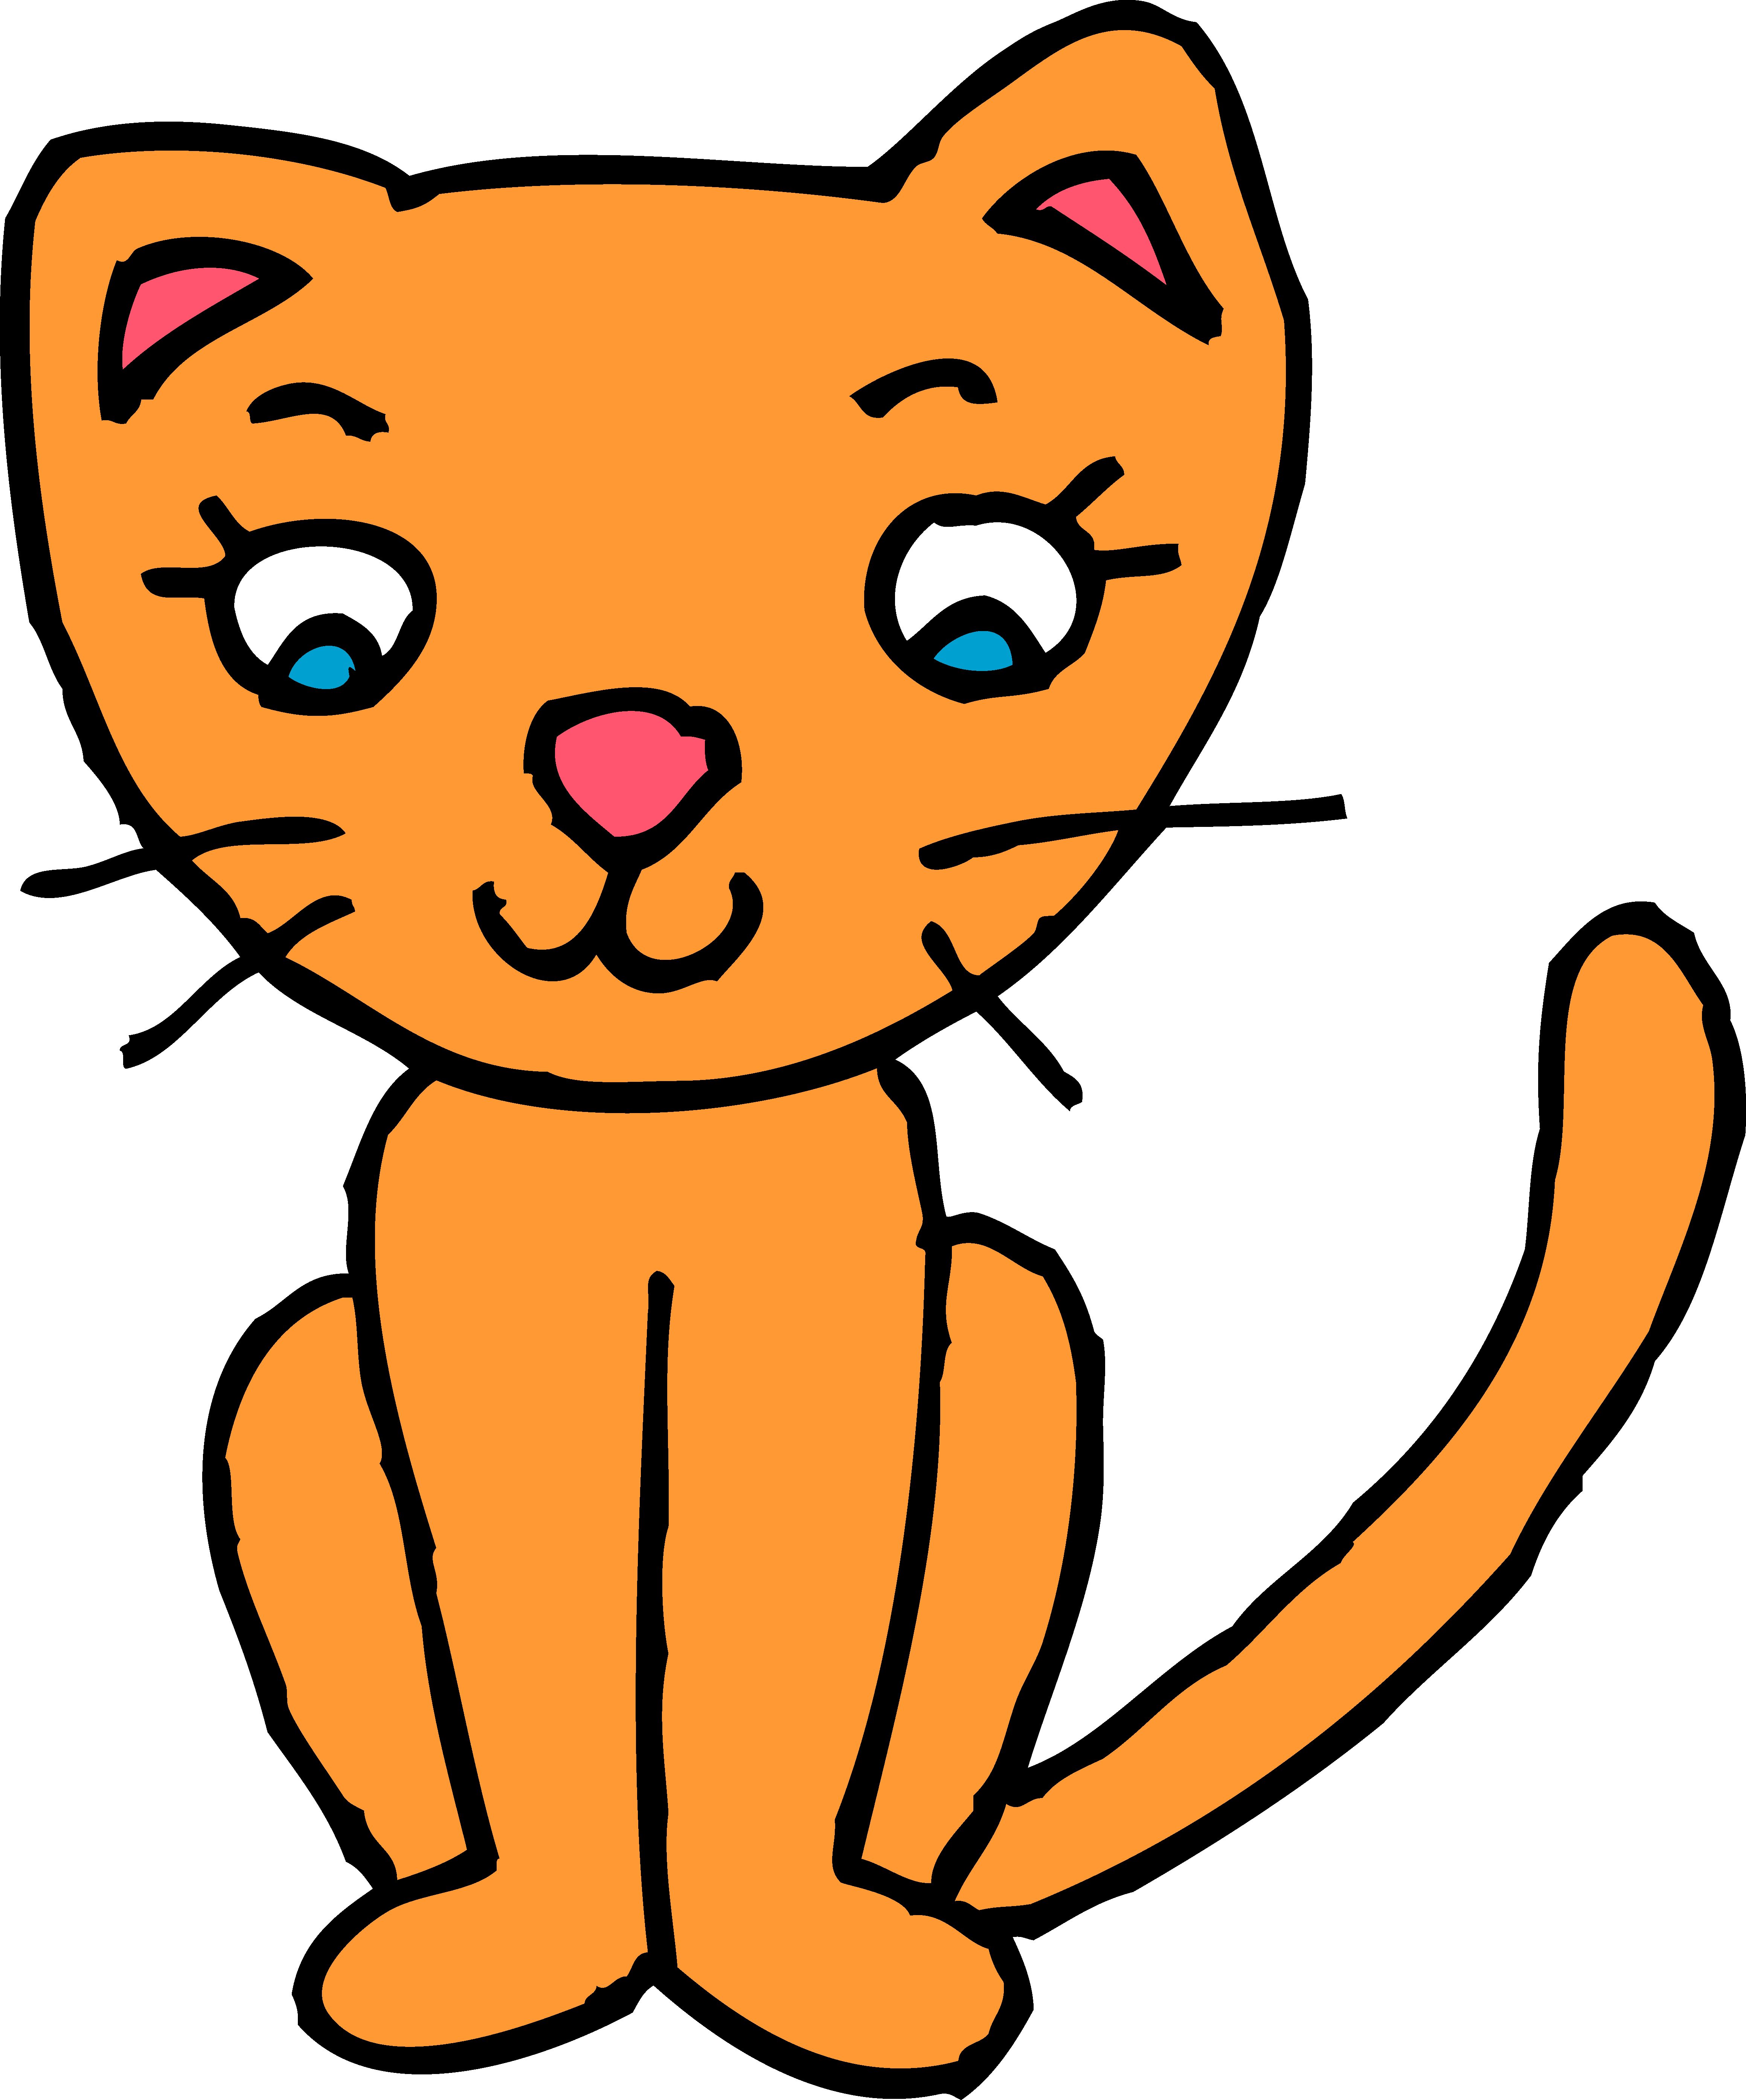 Cute Orange Kitty Cat Clipart | Clipart Panda - Free Clipart Images